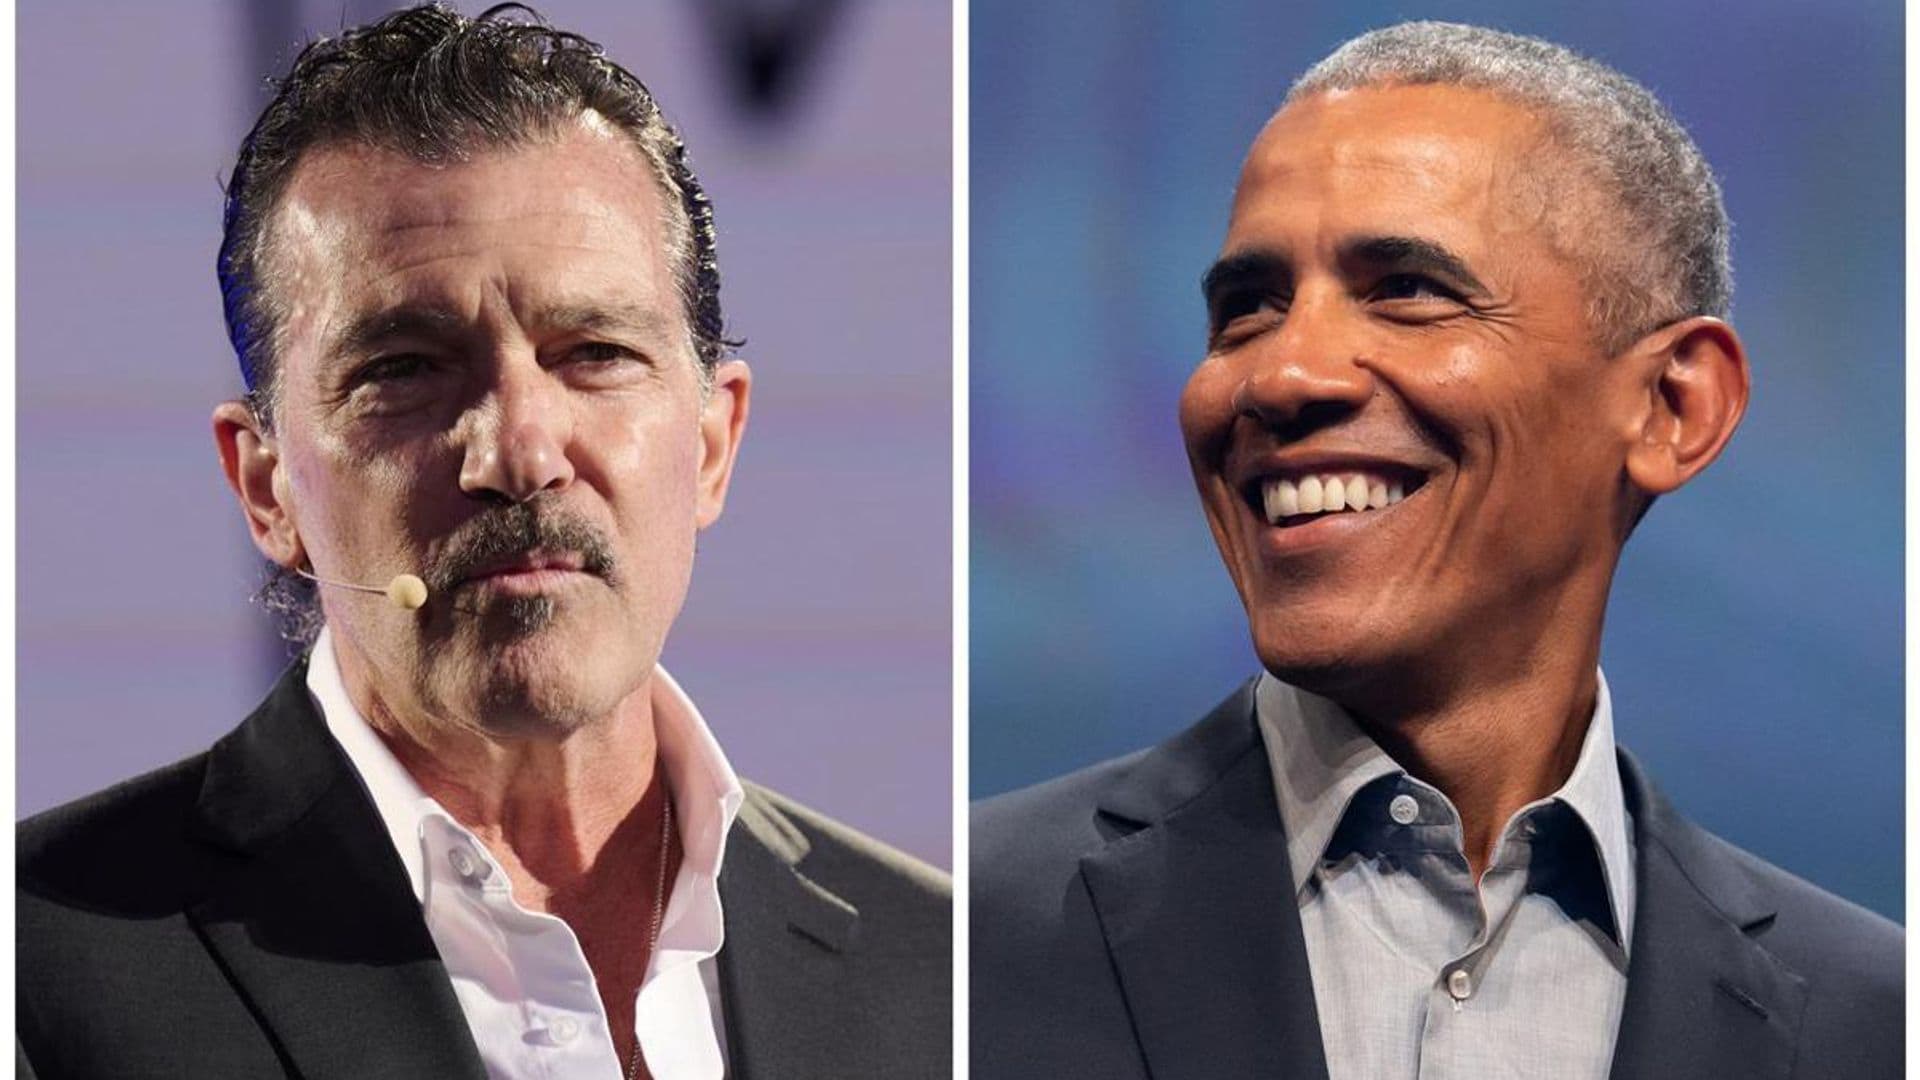 Antonio Banderas forgot his house keys before welcoming Barack Obama into the property